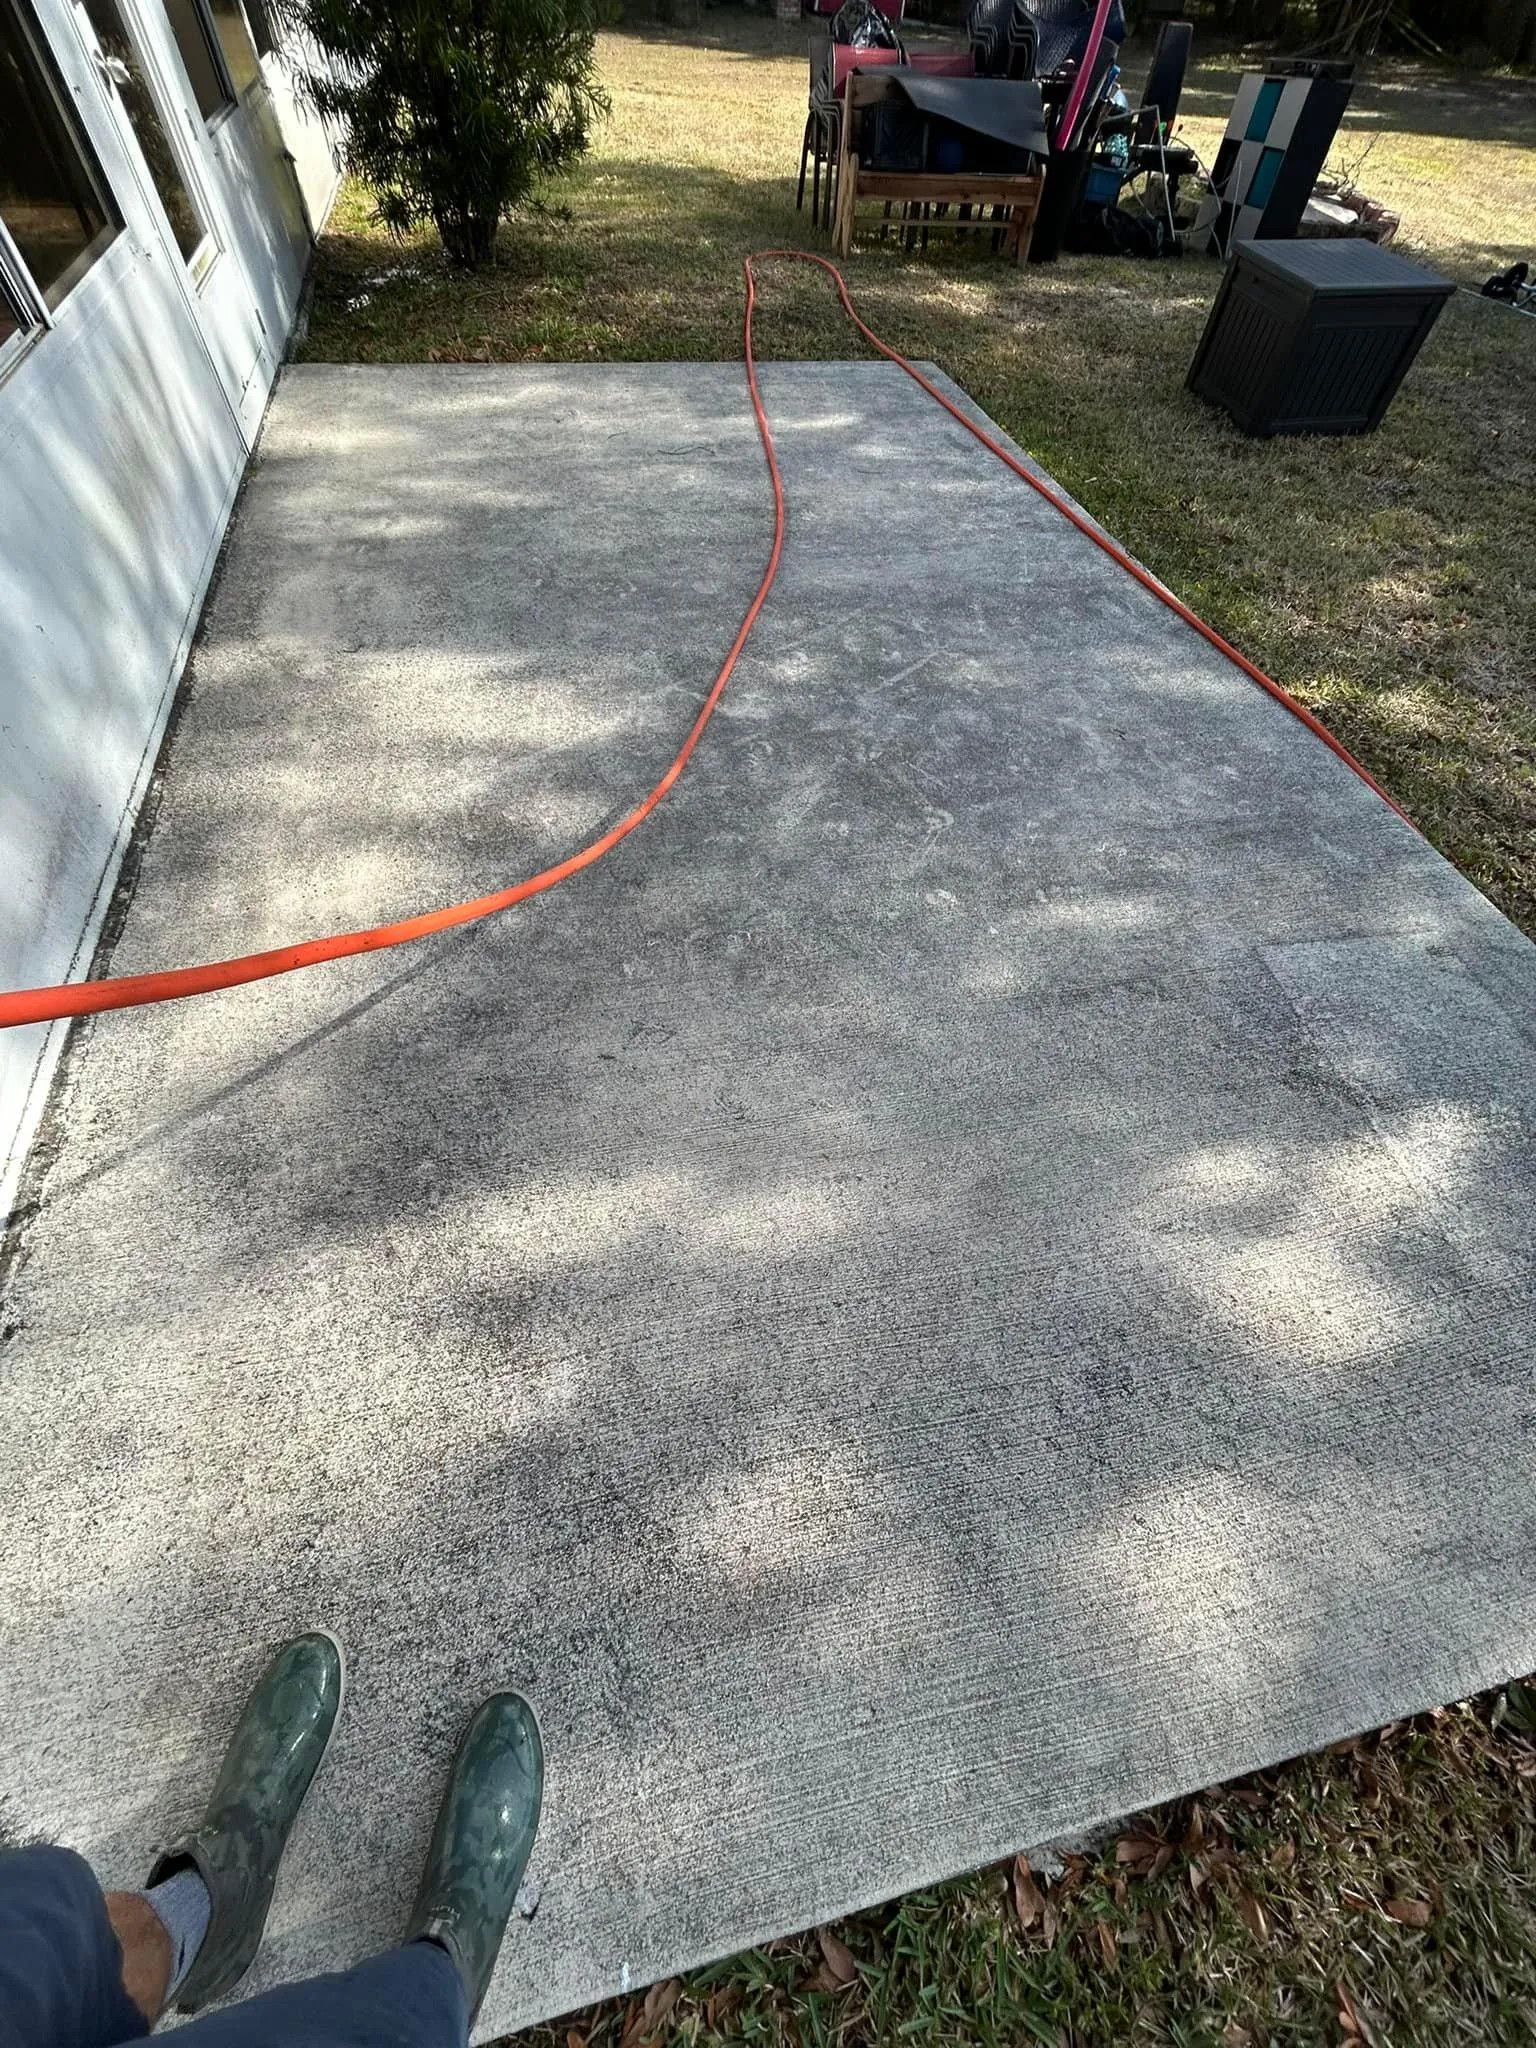 Home Softwash for C & C Pressure Washing in Port Saint Lucie, FL